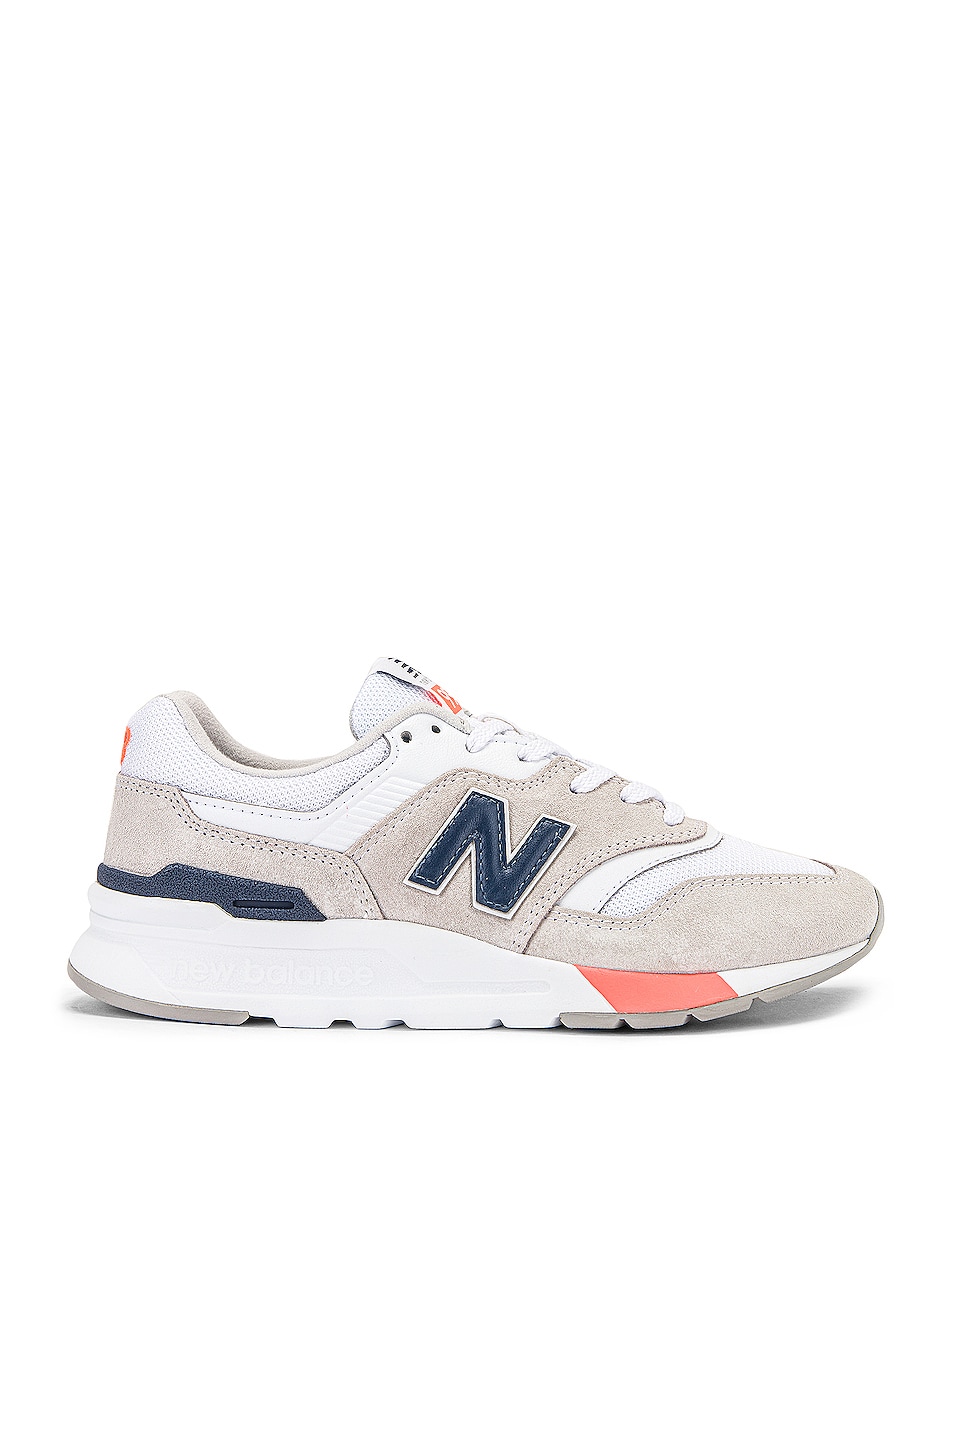 Image 1 of New Balance 997H Sneakers in Summer Fog & Paradise Pink